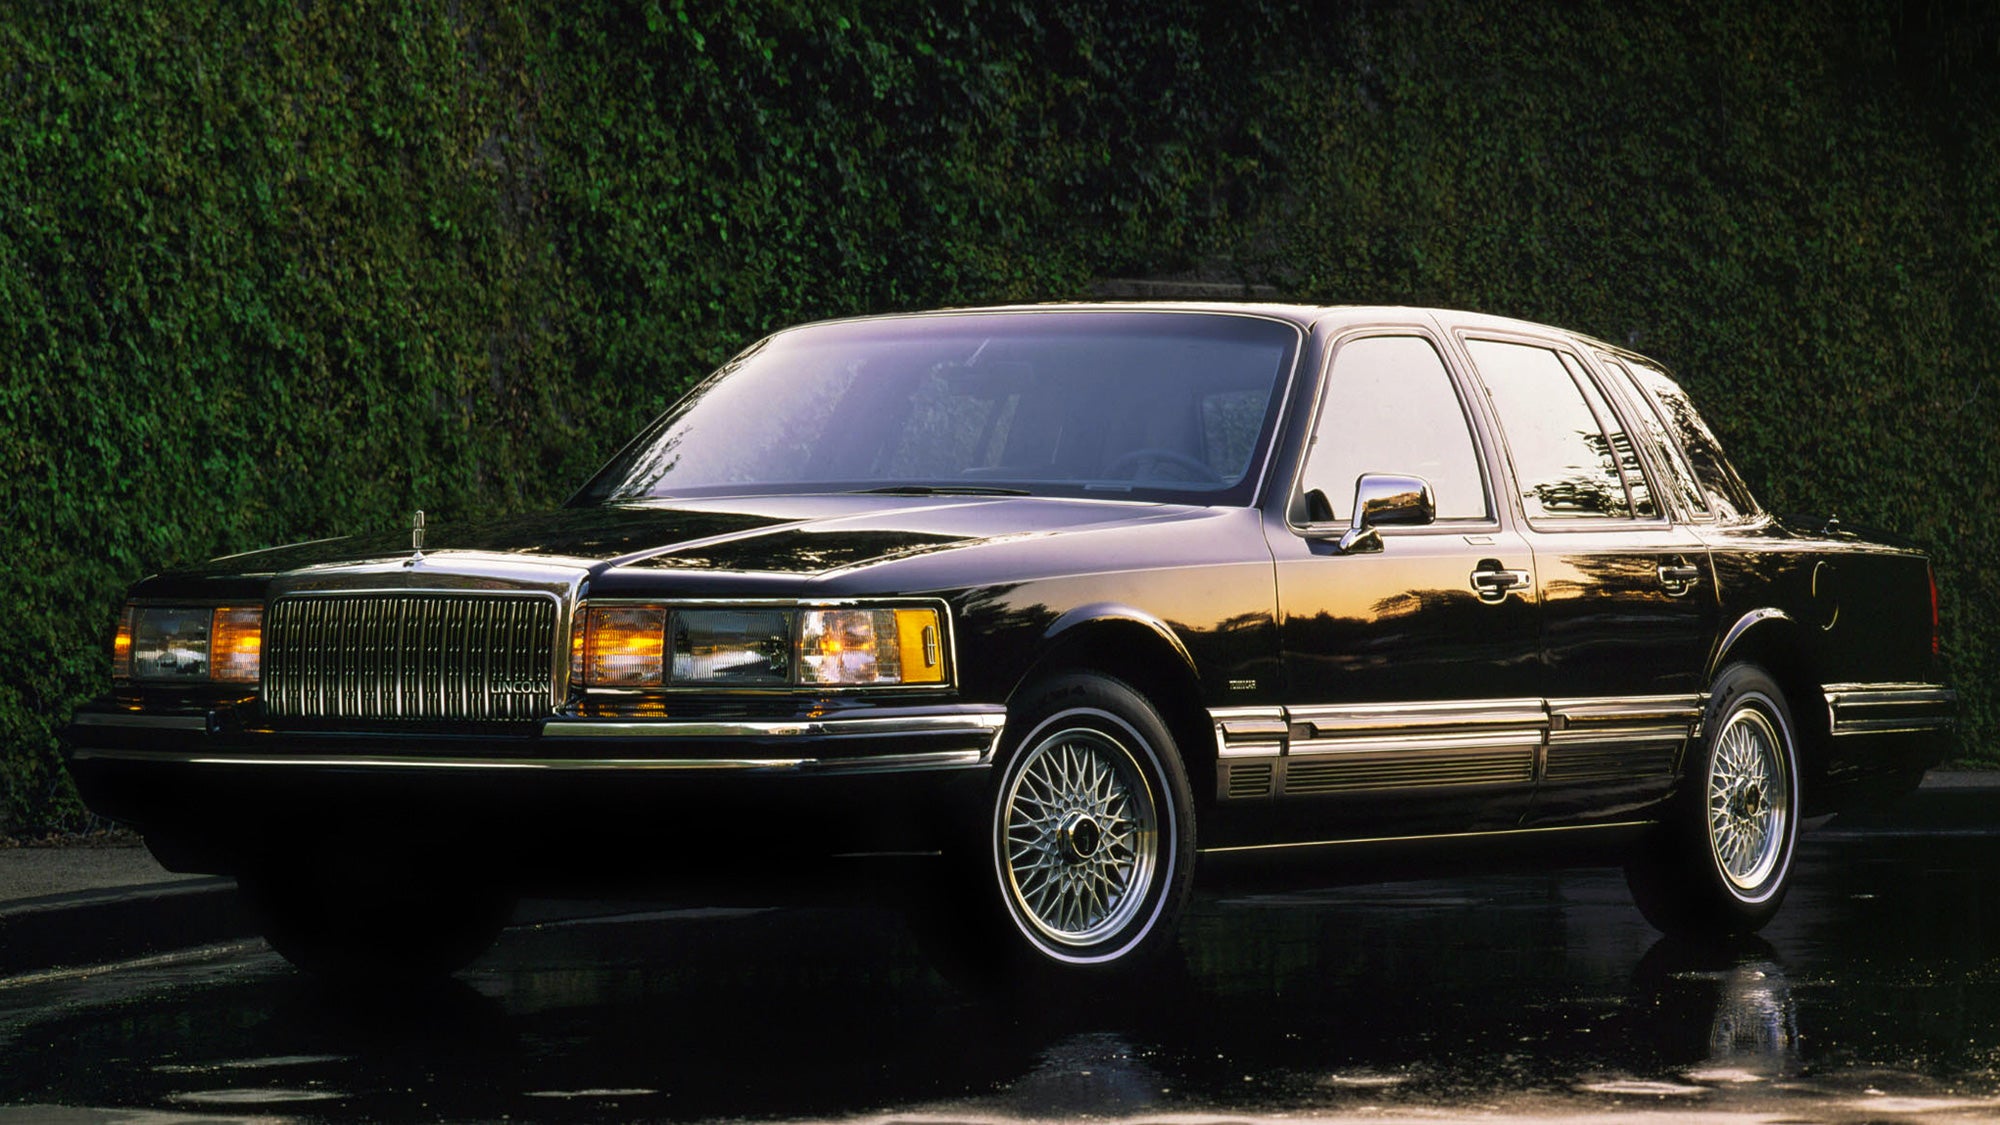 These Are the Cars You’d Take to Your High School Reunion